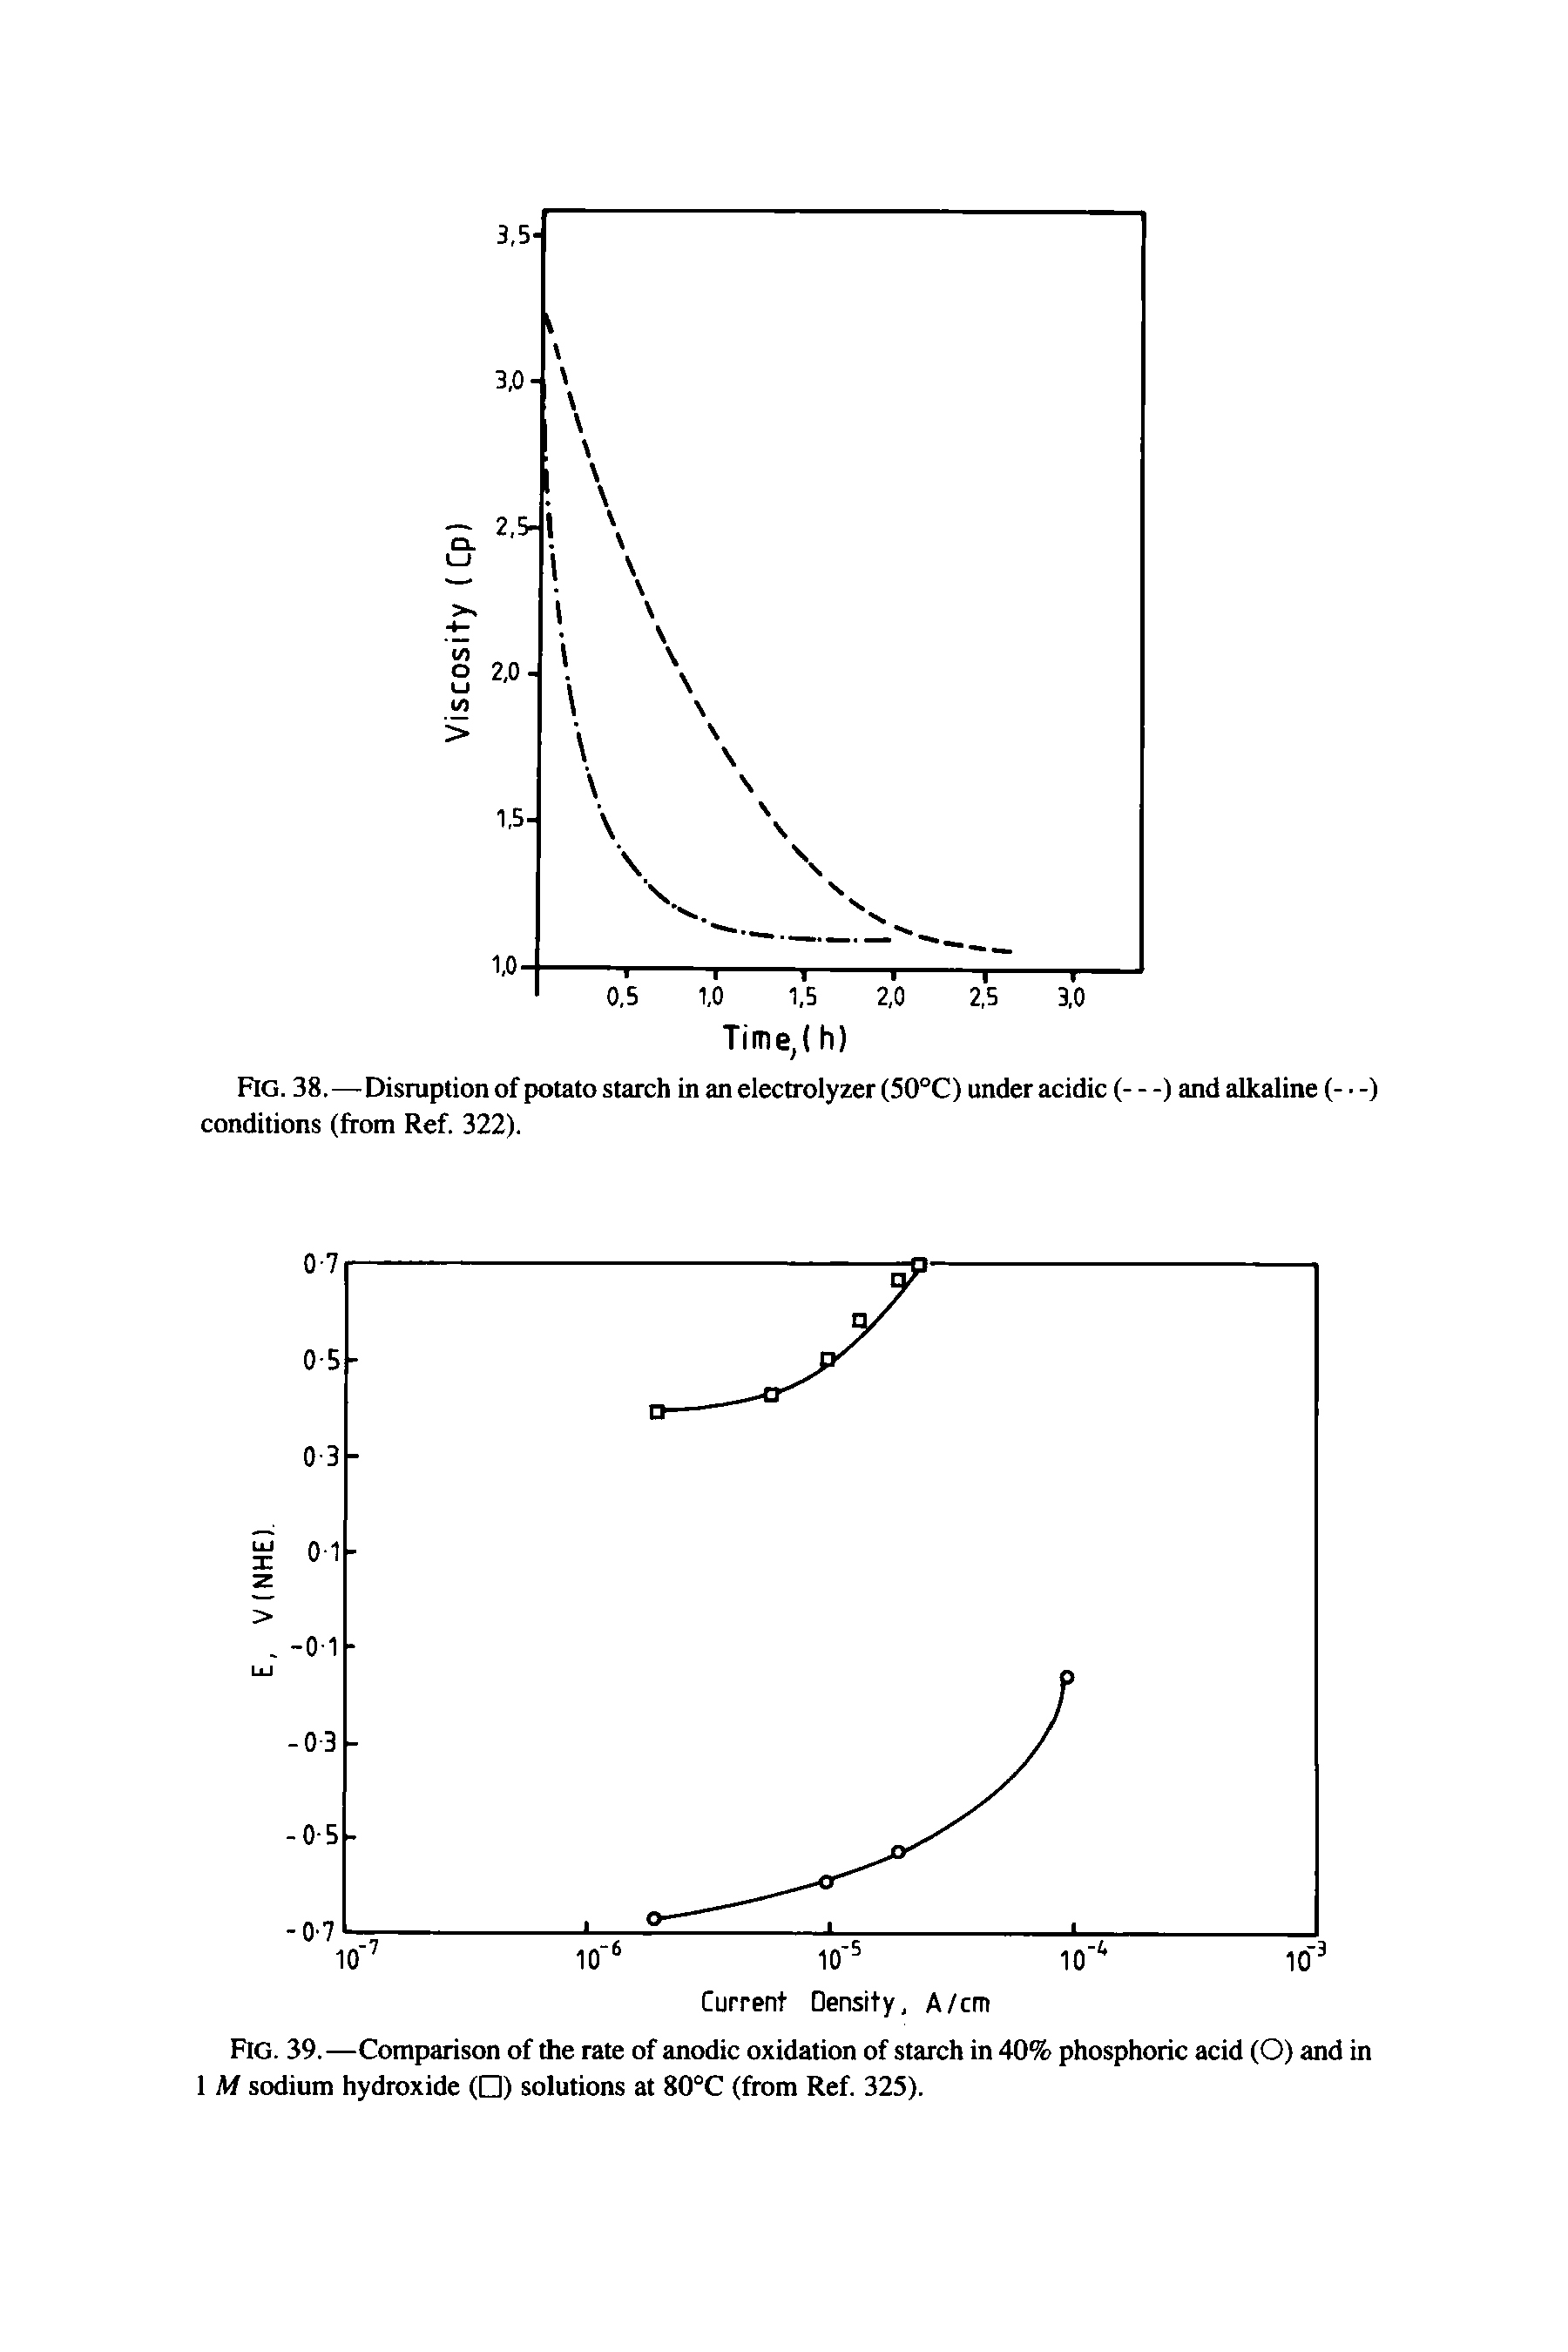 Fig. 39.—Comparison of the rate of anodic oxidation of starch in 40% phosphoric acid (O) and in 1 M sodium hydroxide ( ) solutions at 80°C (from Ref. 325).